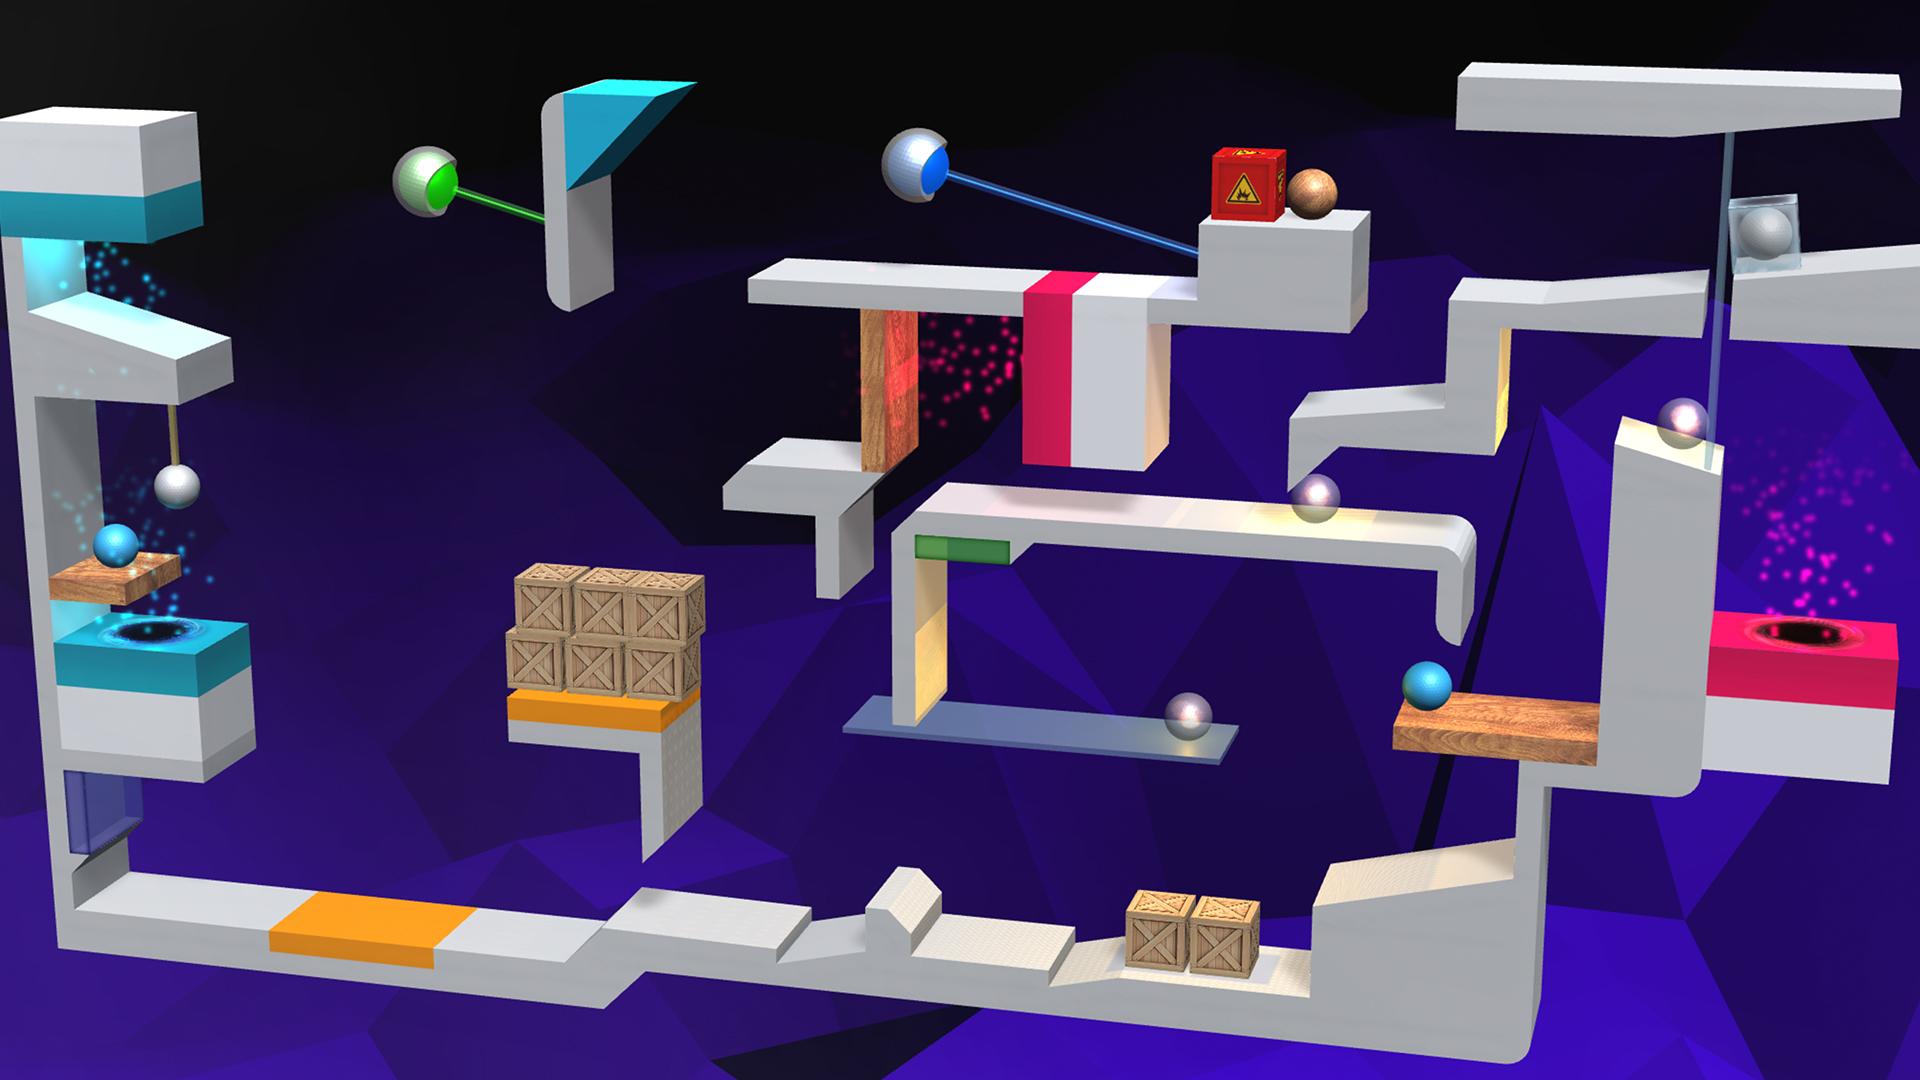 download the last version for iphoneHeart Box - free physics puzzles game